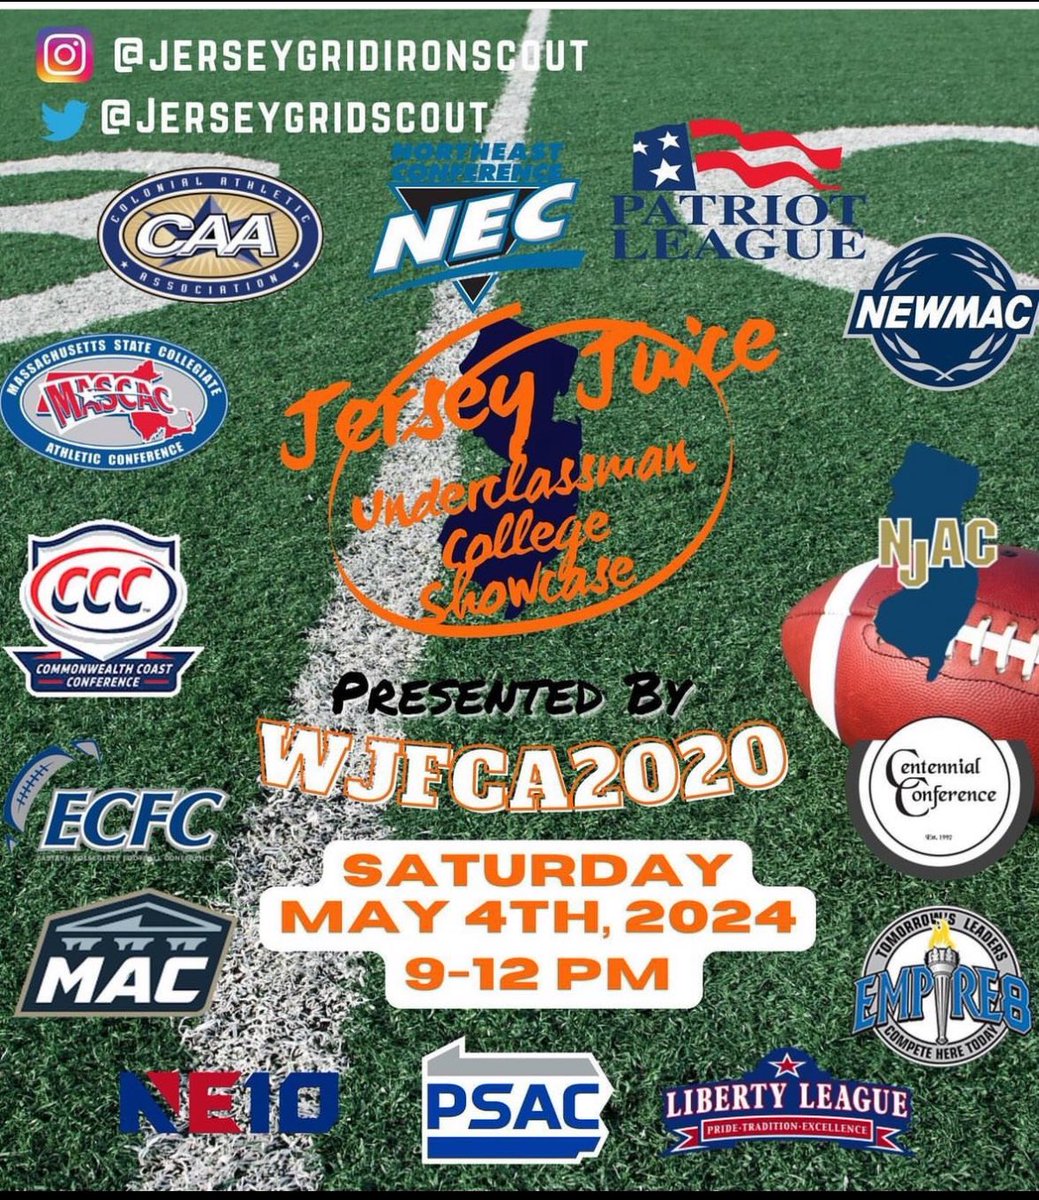 i'll be attending to Jersey juice underclassmen college showcase next weekend!!! @JerseyGridScout @DCoachBupRob @AbsegamiFB #EAT